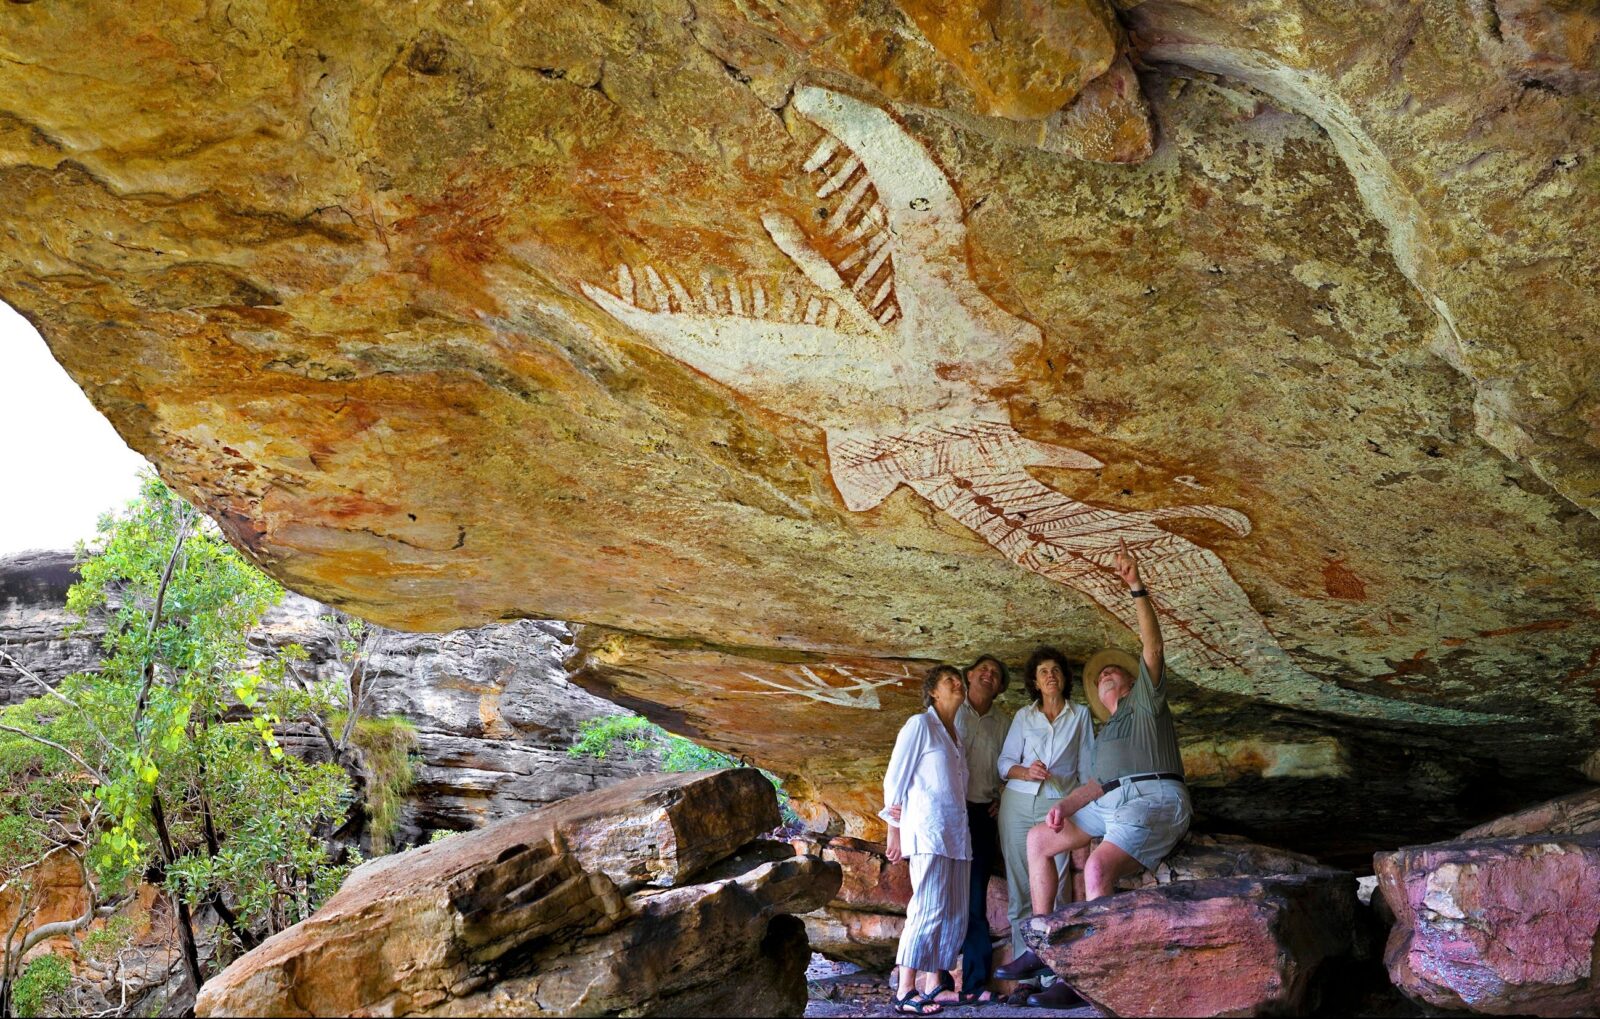 Experience ancient rock art galleries such as the Rainbow Serpent measuring over 6 meters.